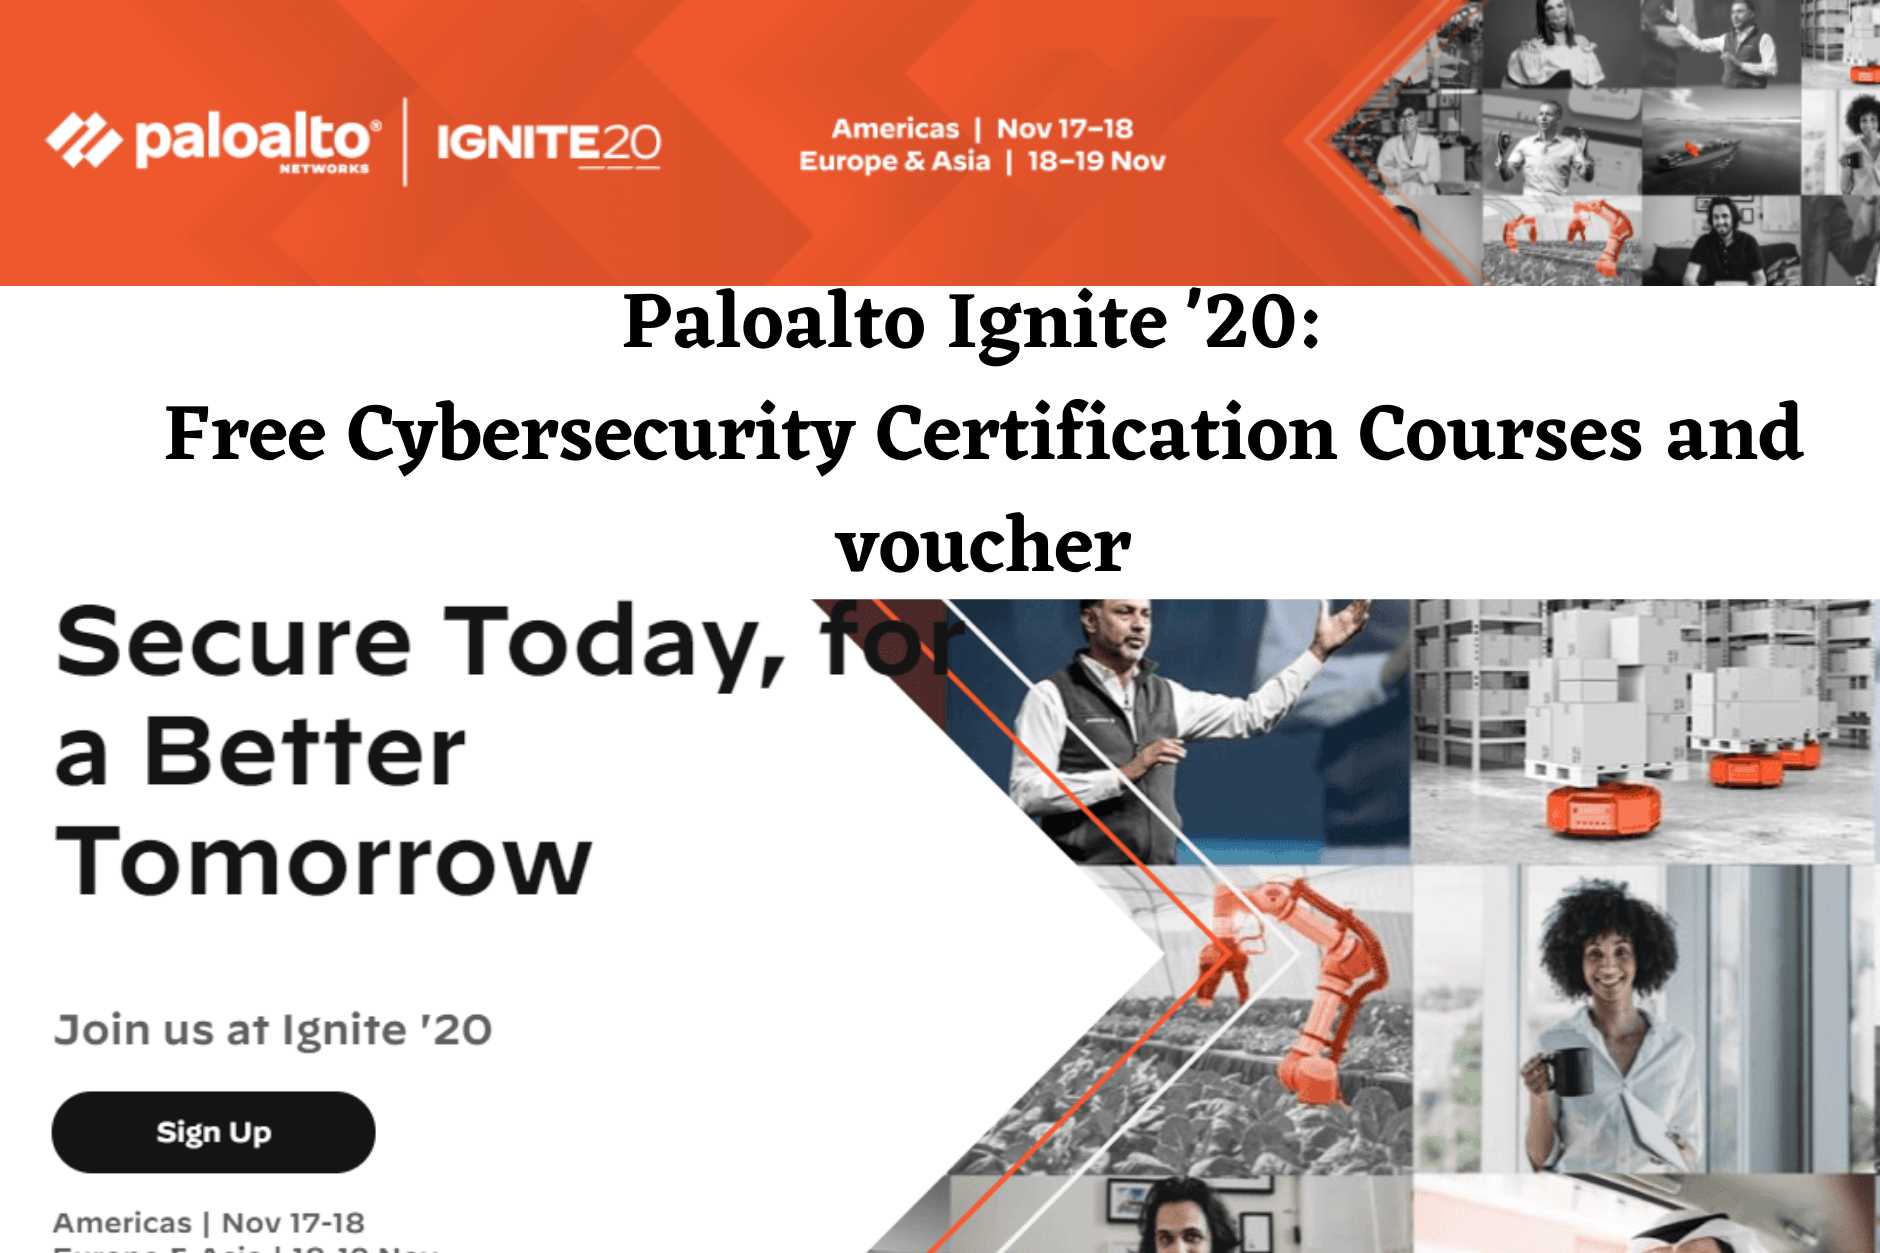 Free Cybersecurity Certification Courses and voucher